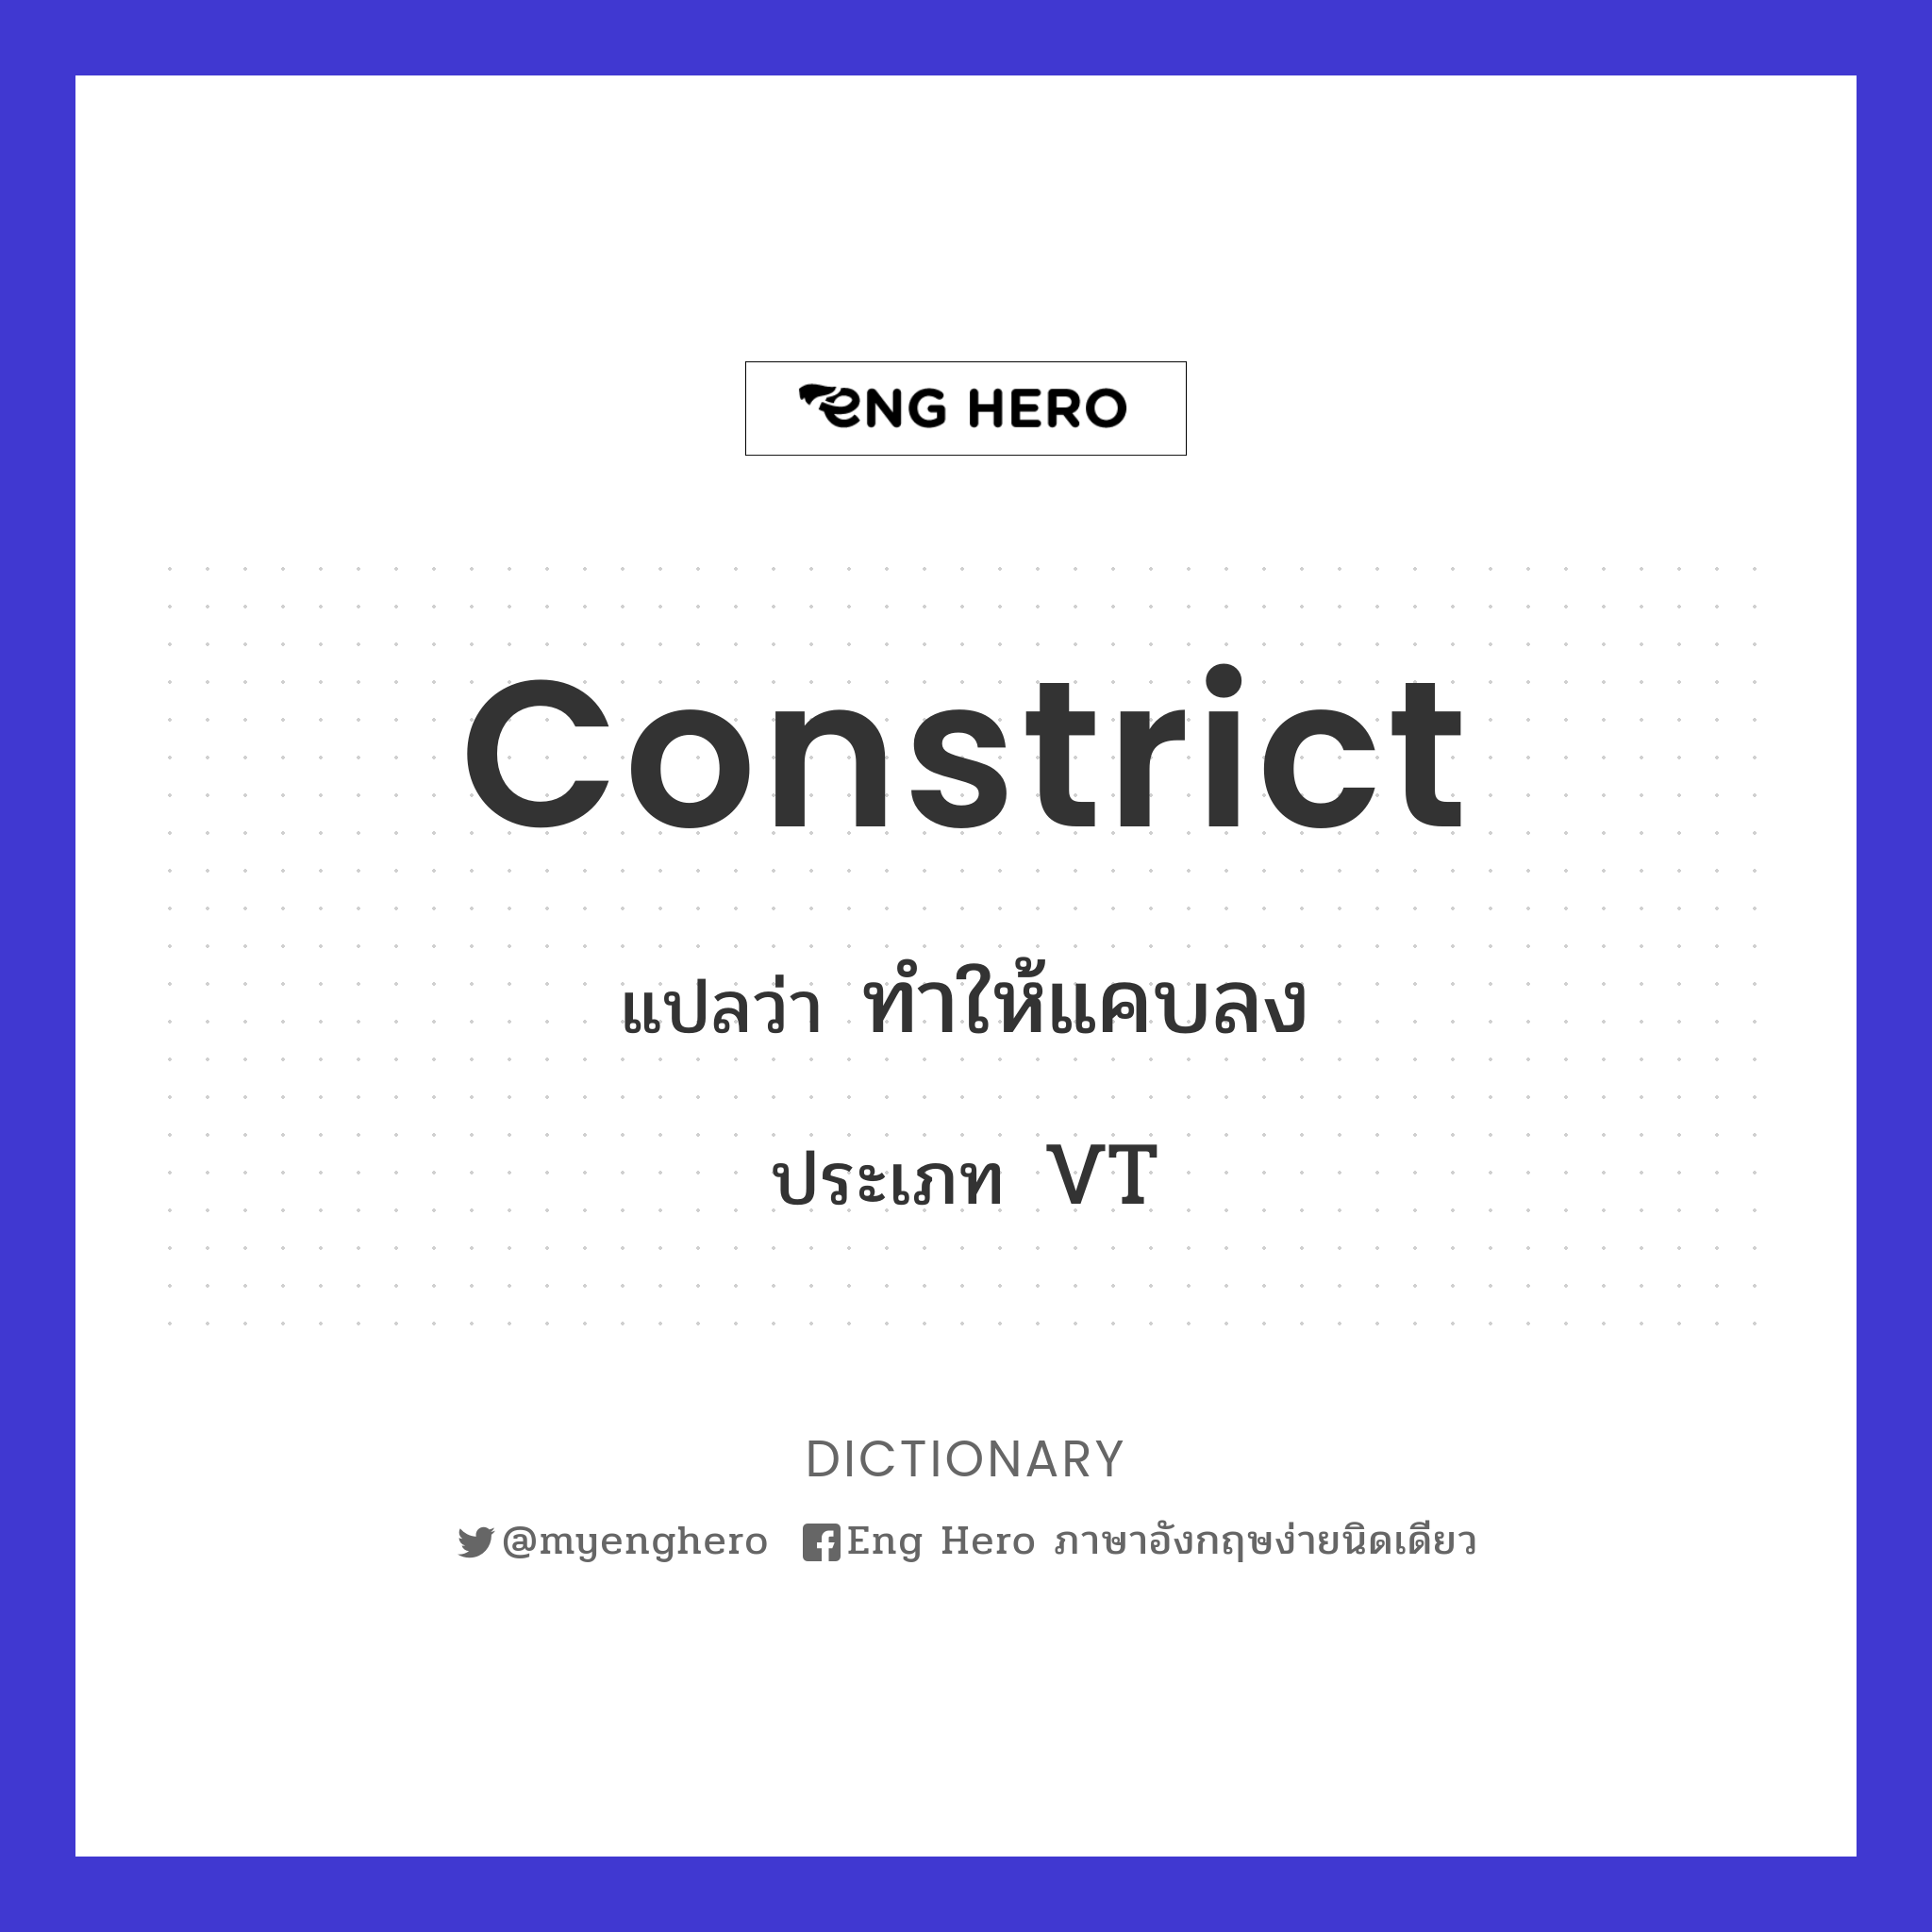 constrict